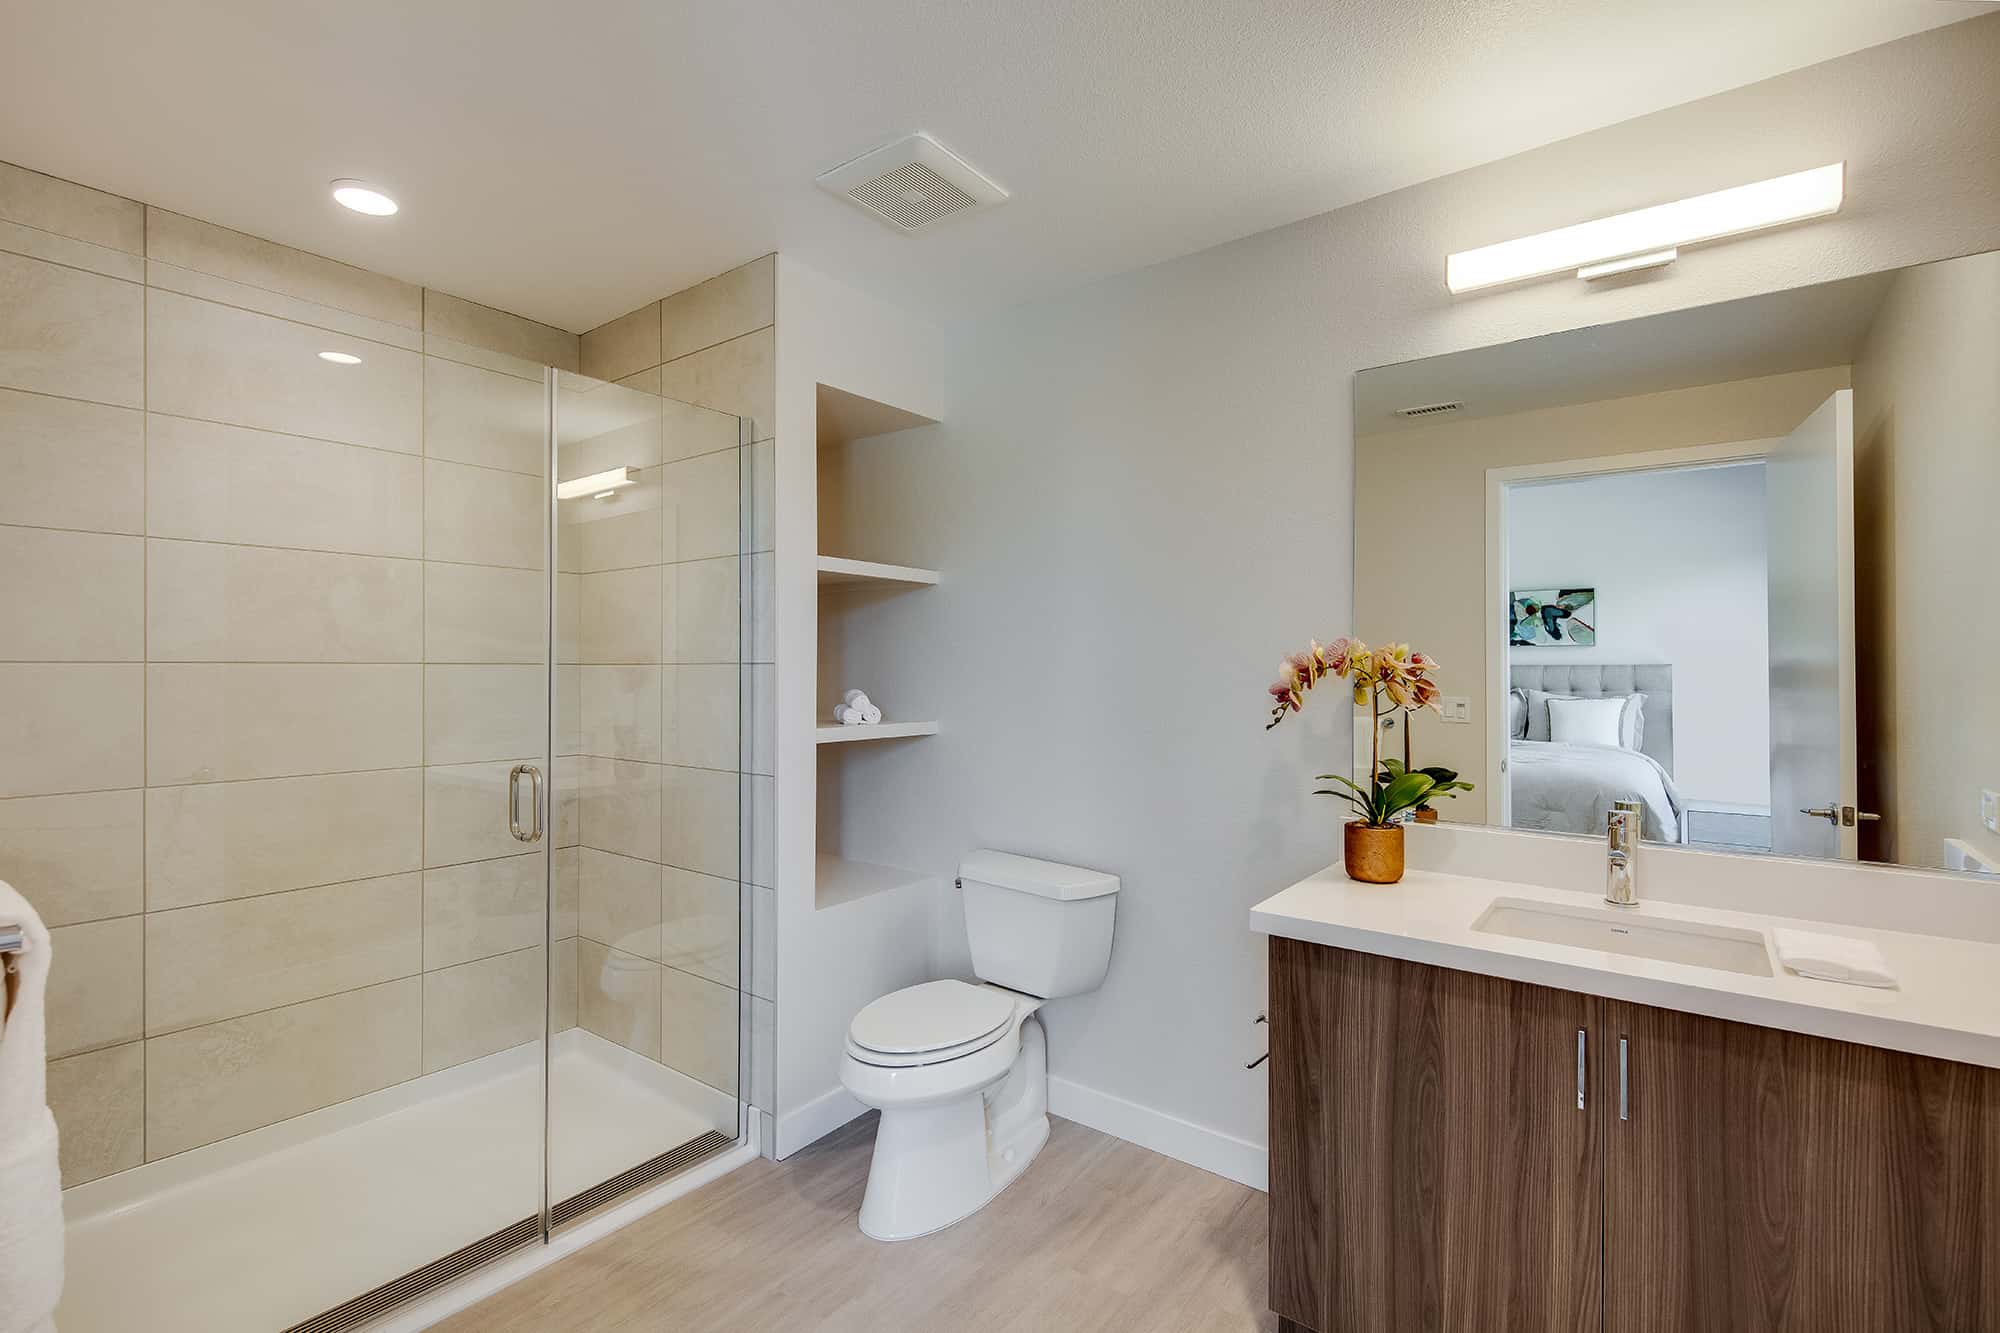 Luxury Apartments Menlo Park - Realm - Spacious Bathroom With a Glass Shower, Large Mirror, Wooden Cabinets, and Shelving